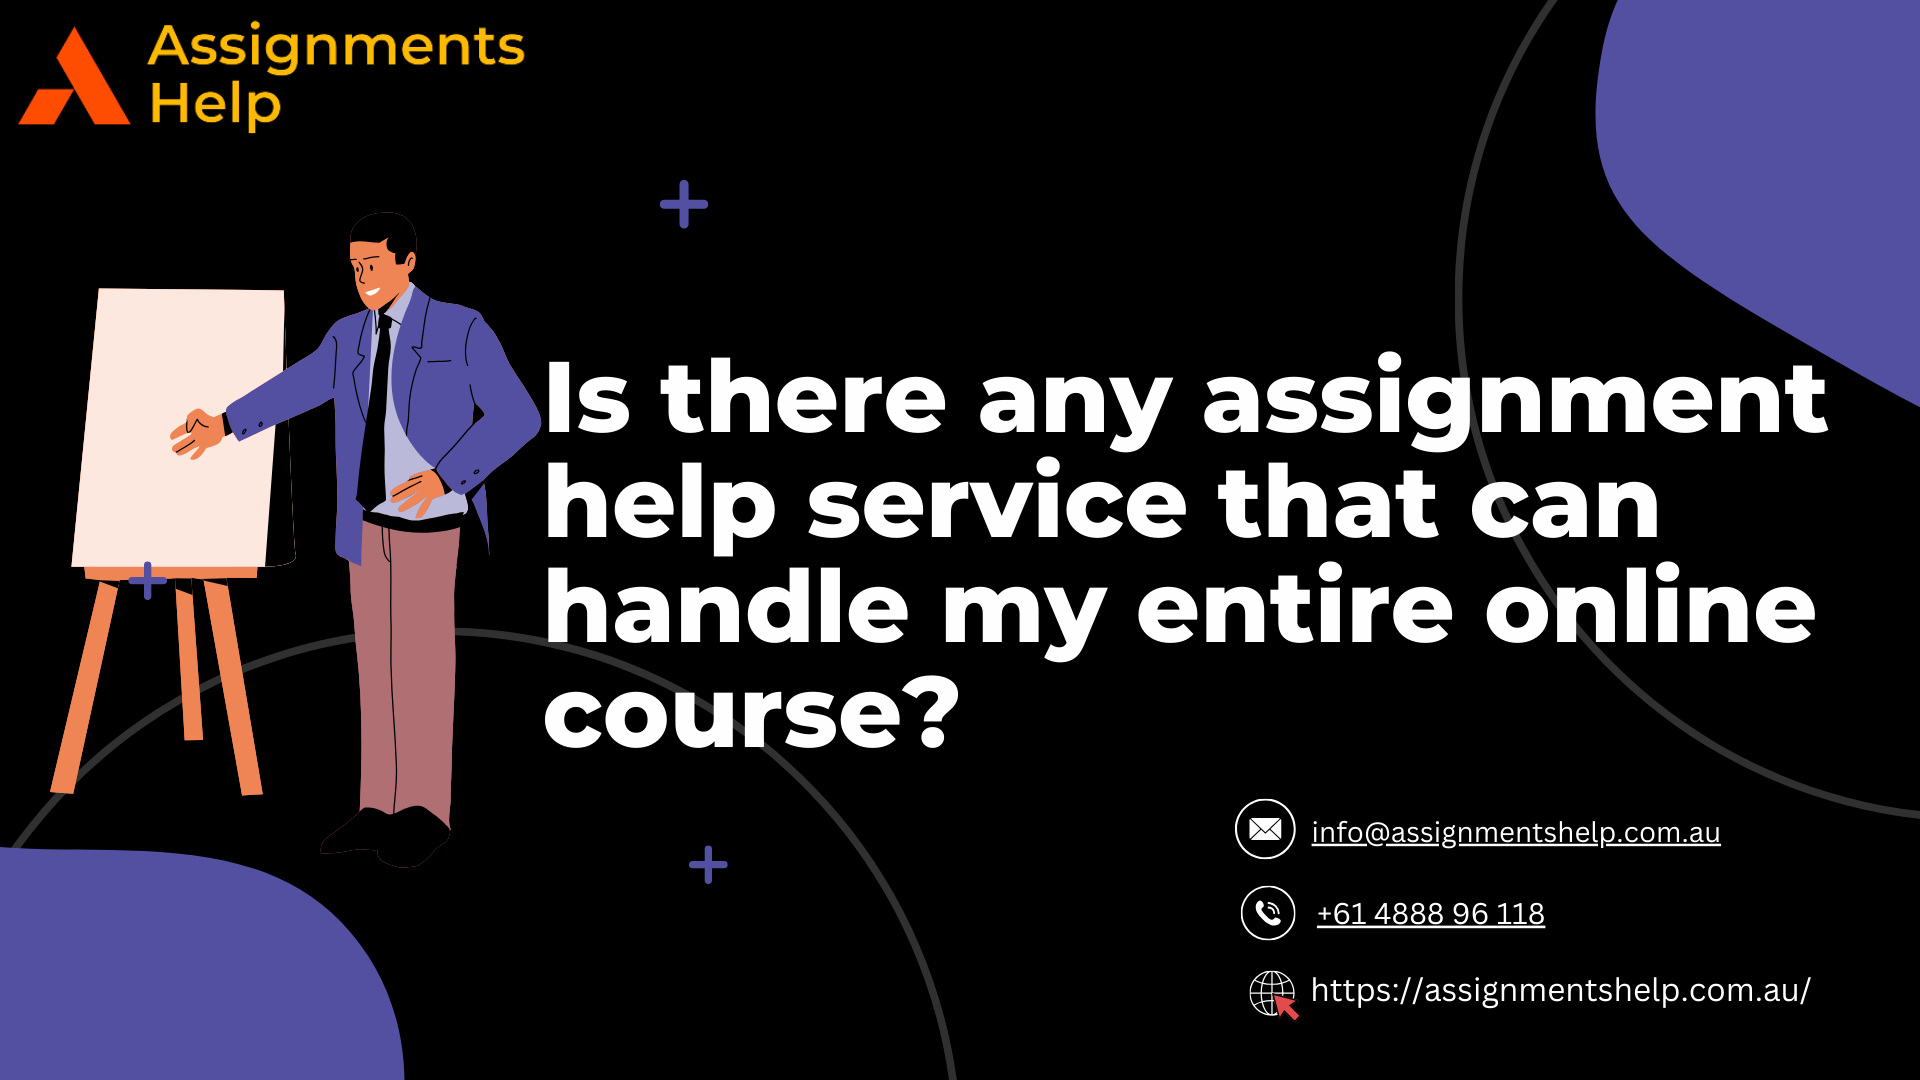 HOW MUCH DOES AN ASSIGNMENT HELP TYPICALLY COST?